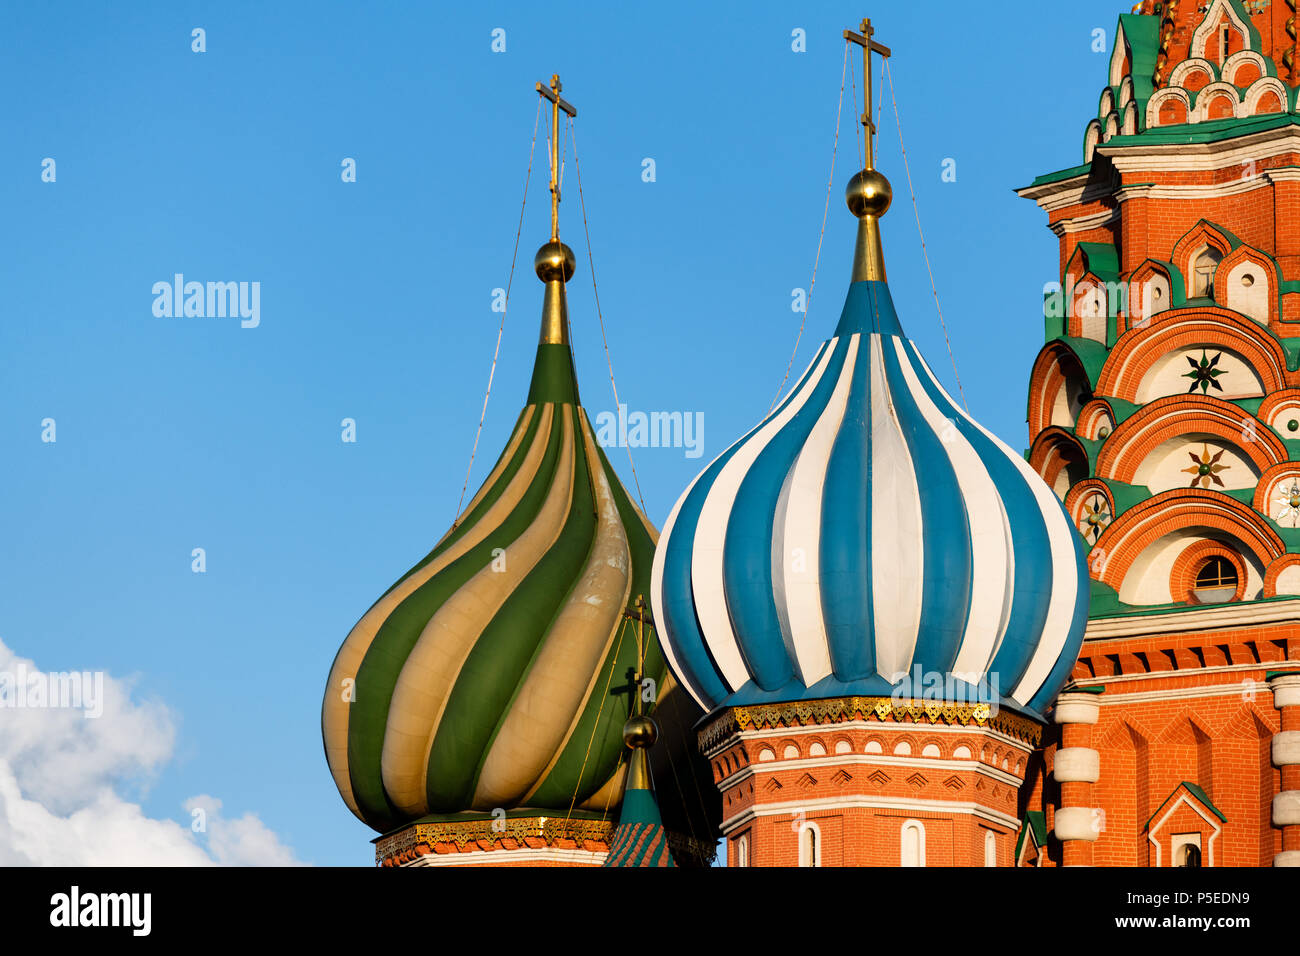 Saint Basil's Cathedral in Moscow's Red Square Stock Photo